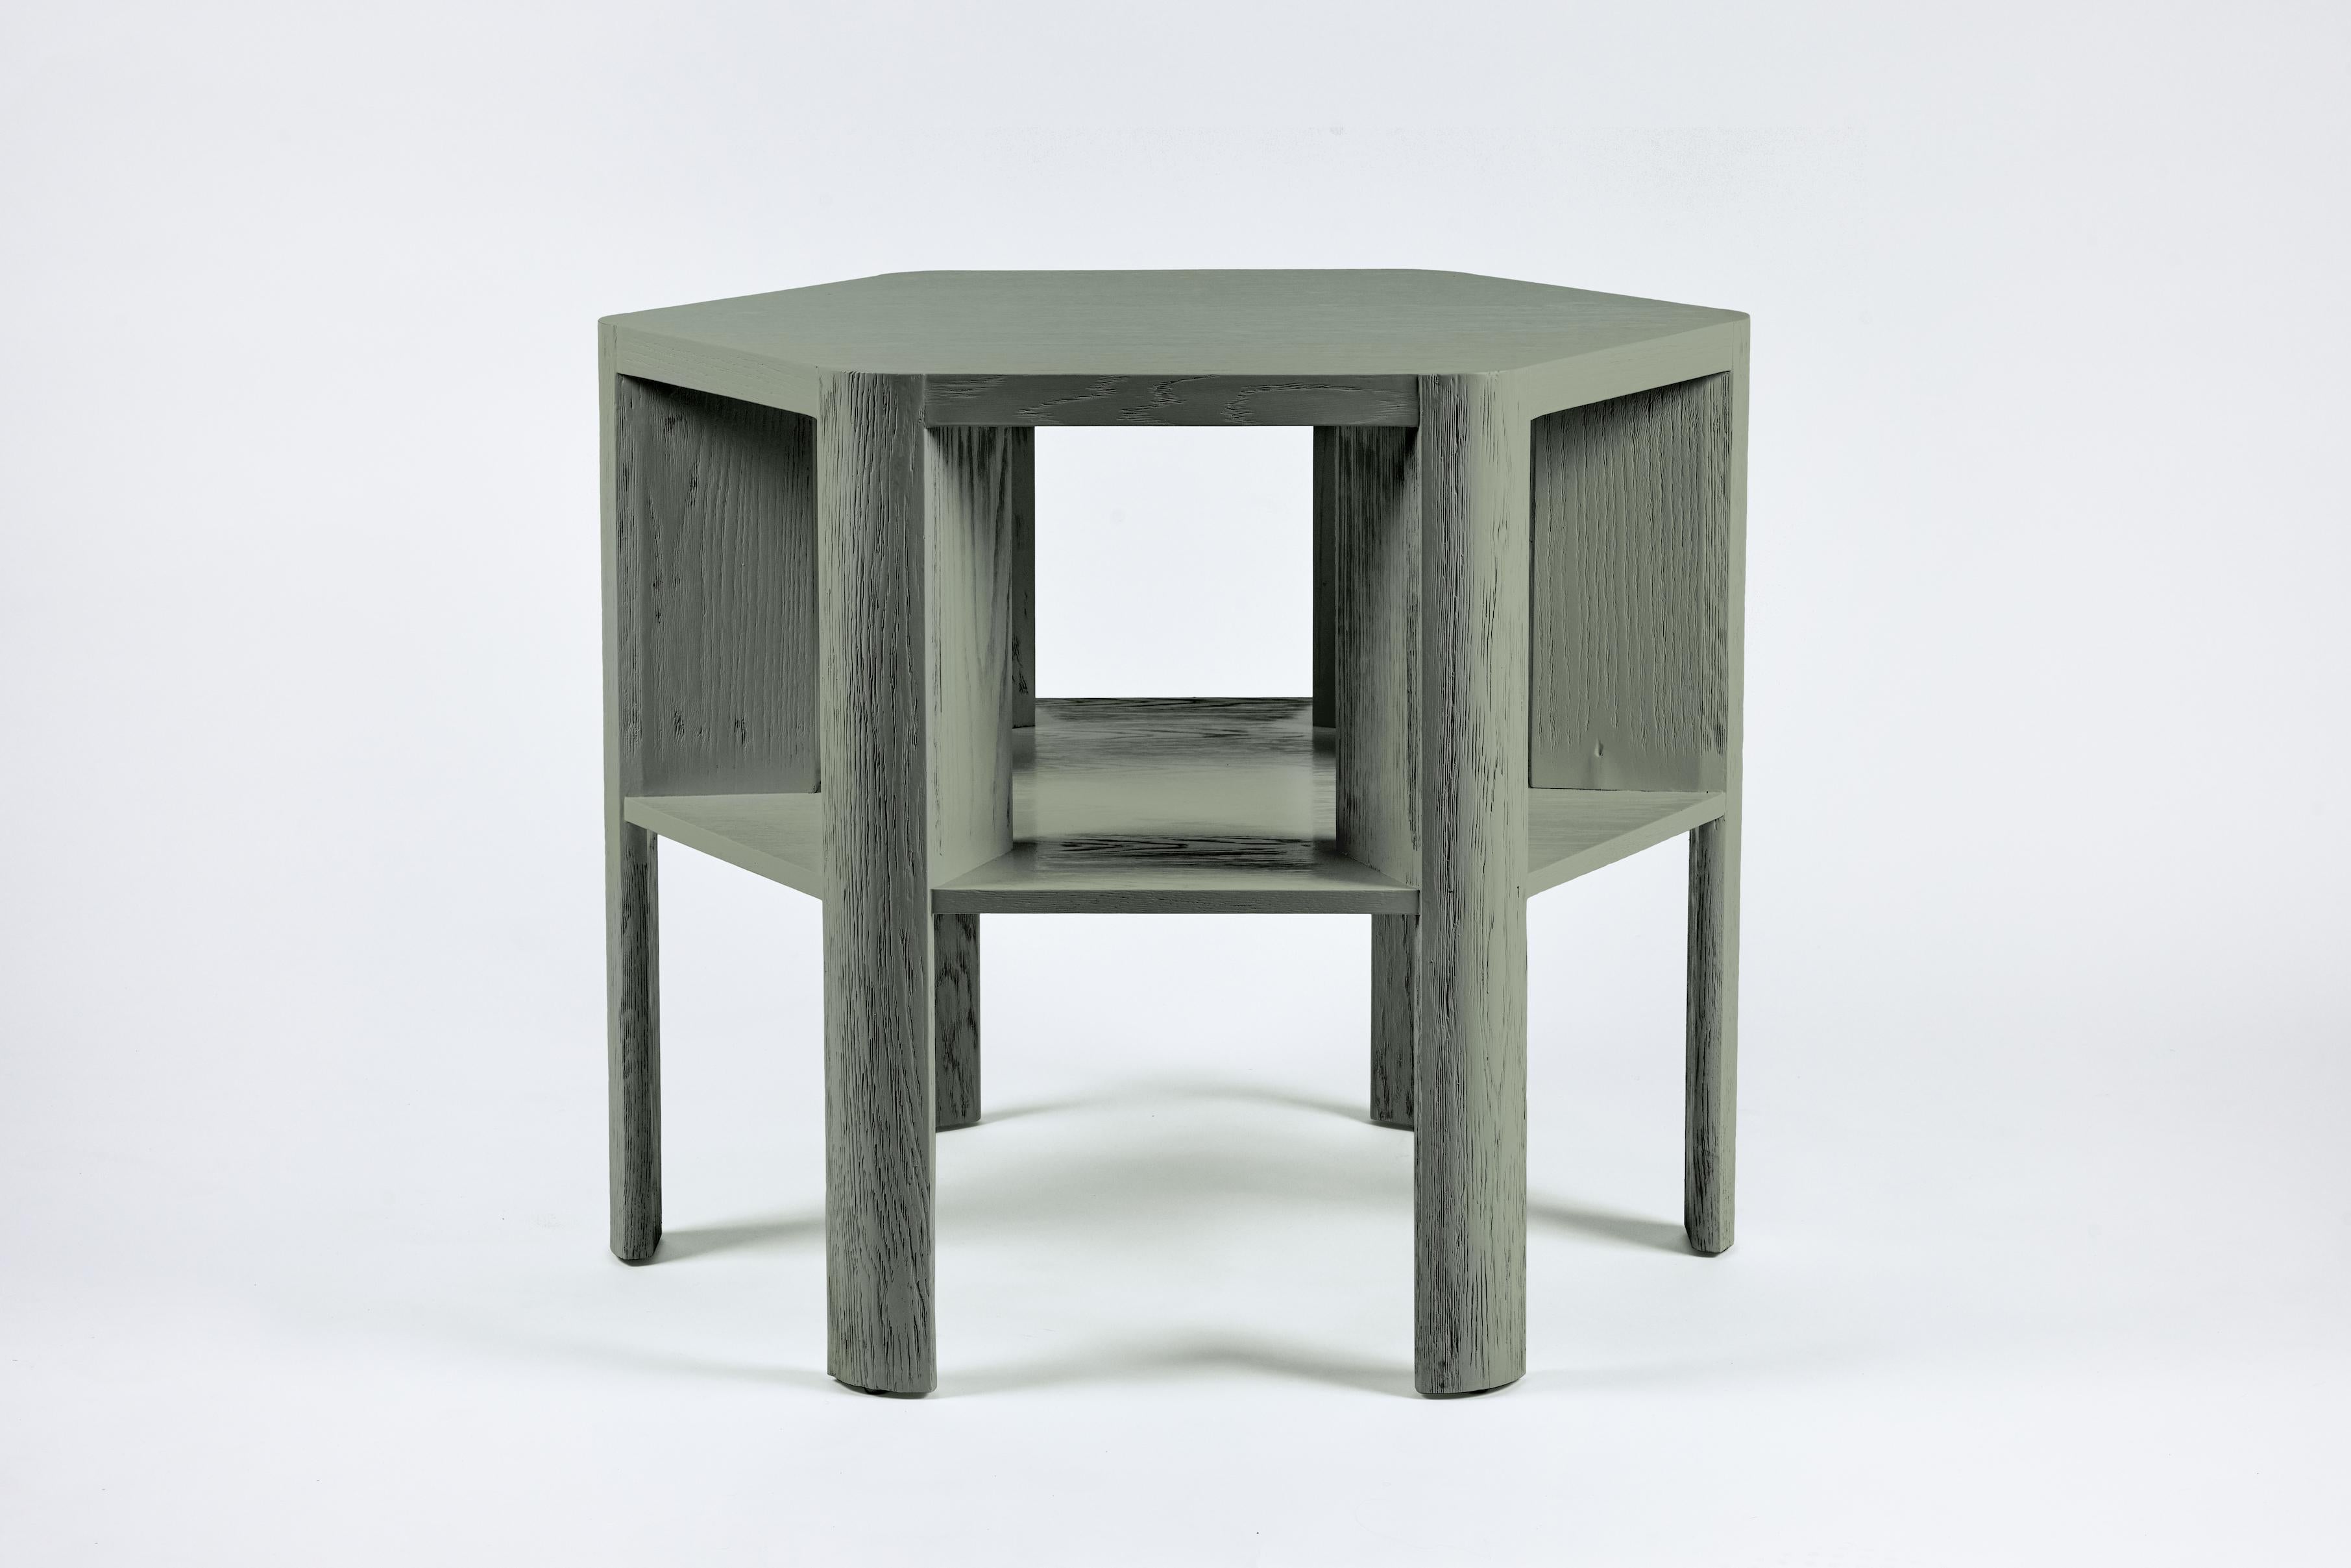 American Minimalist Modern Lacquered Library Table Shown in Scrubbed Lichen For Sale